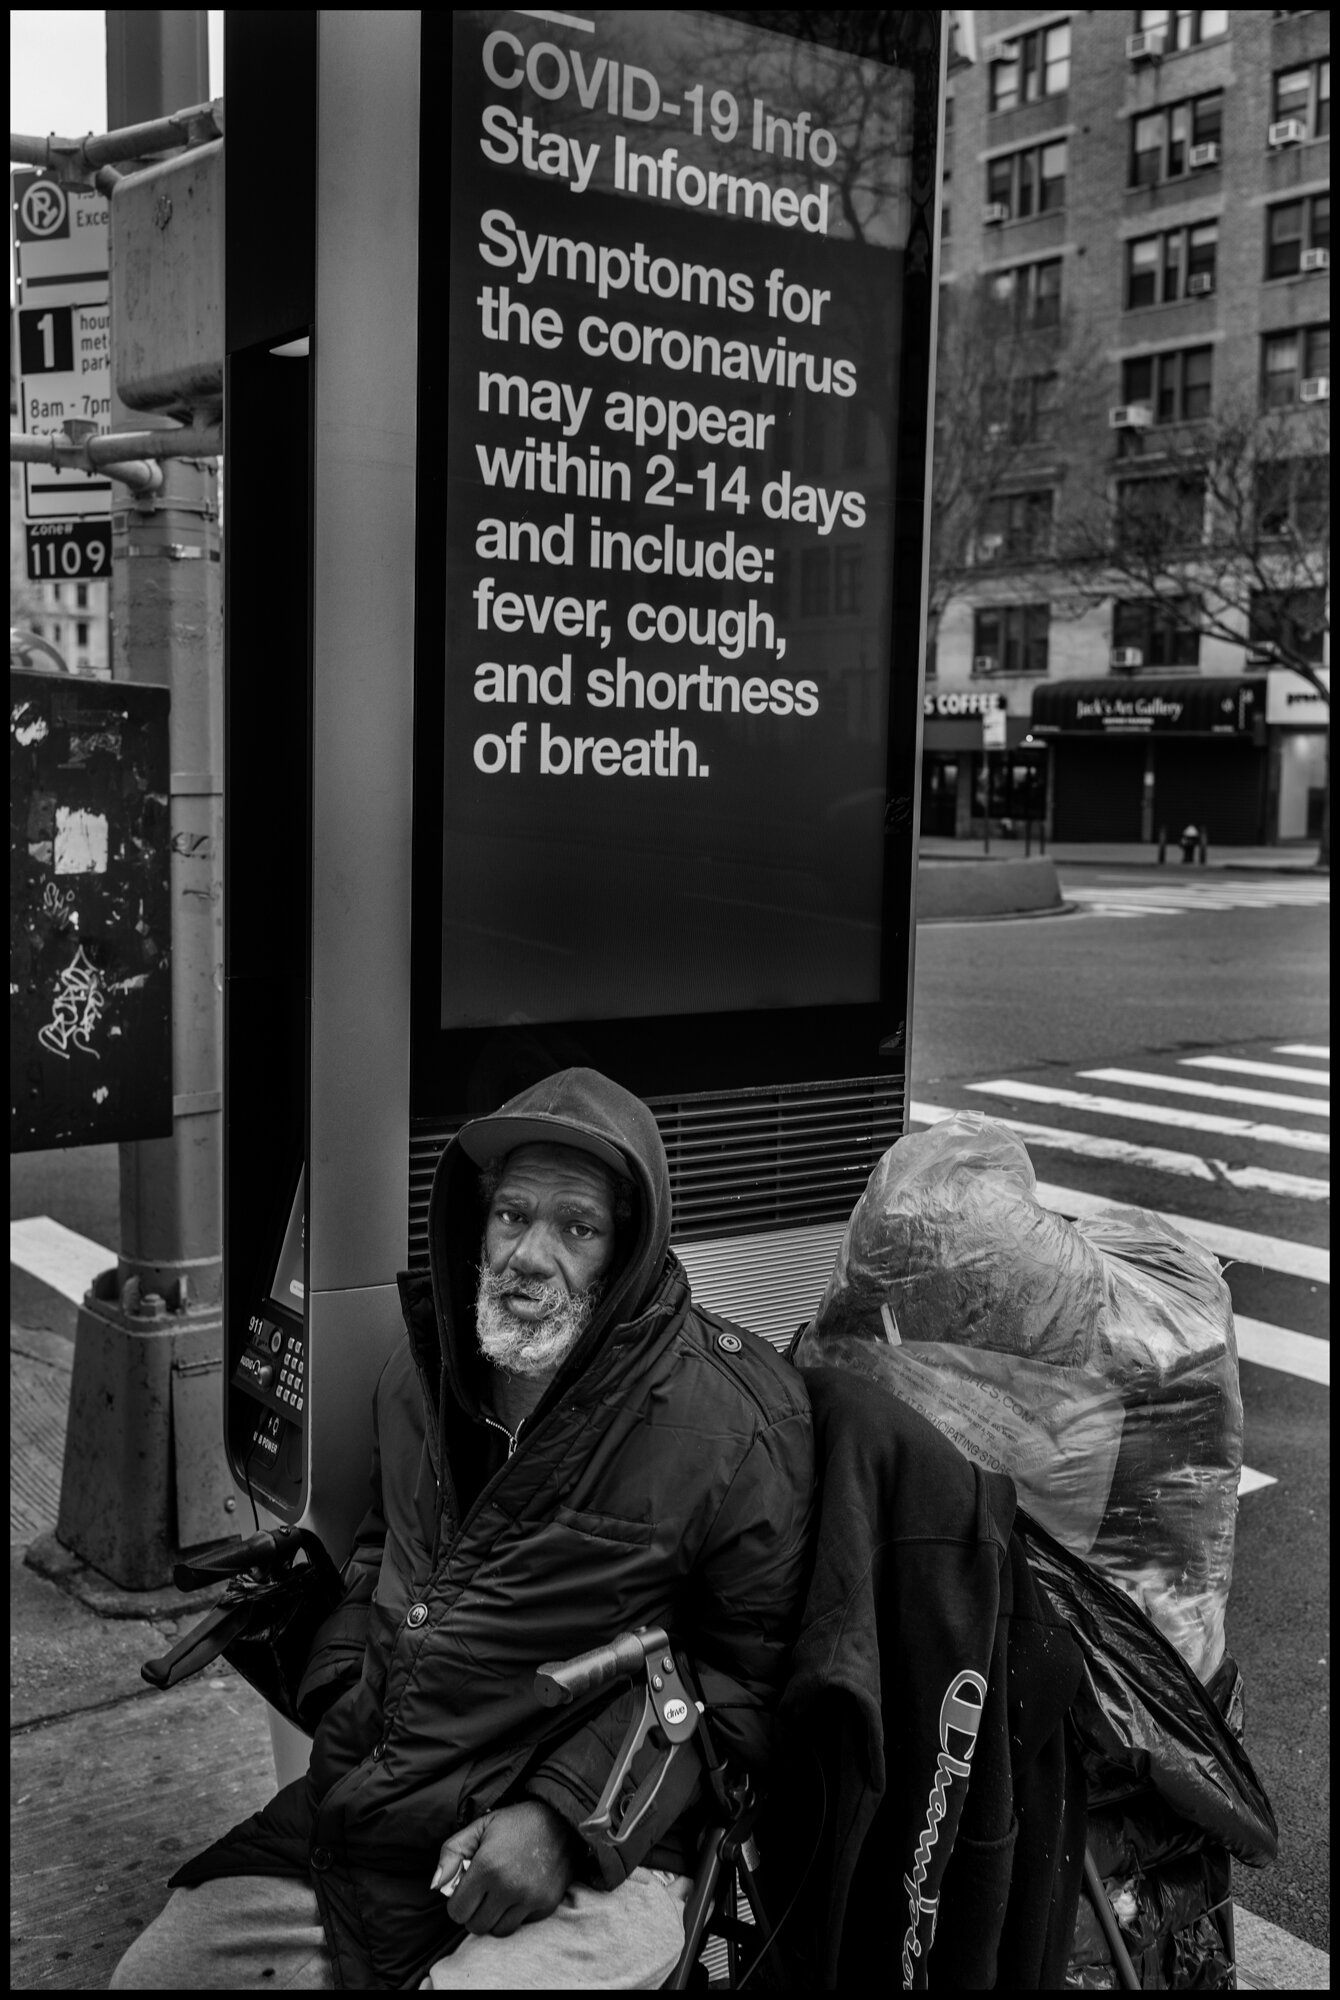  Bruce who is 67 and homeless sits hoping to receive money for food near Columbia College on the Upper Westside. I ask him how things were going. “it’s kind of rough”. I asked him if he was scared, and he replied, “no, I was scared when I went to Nam